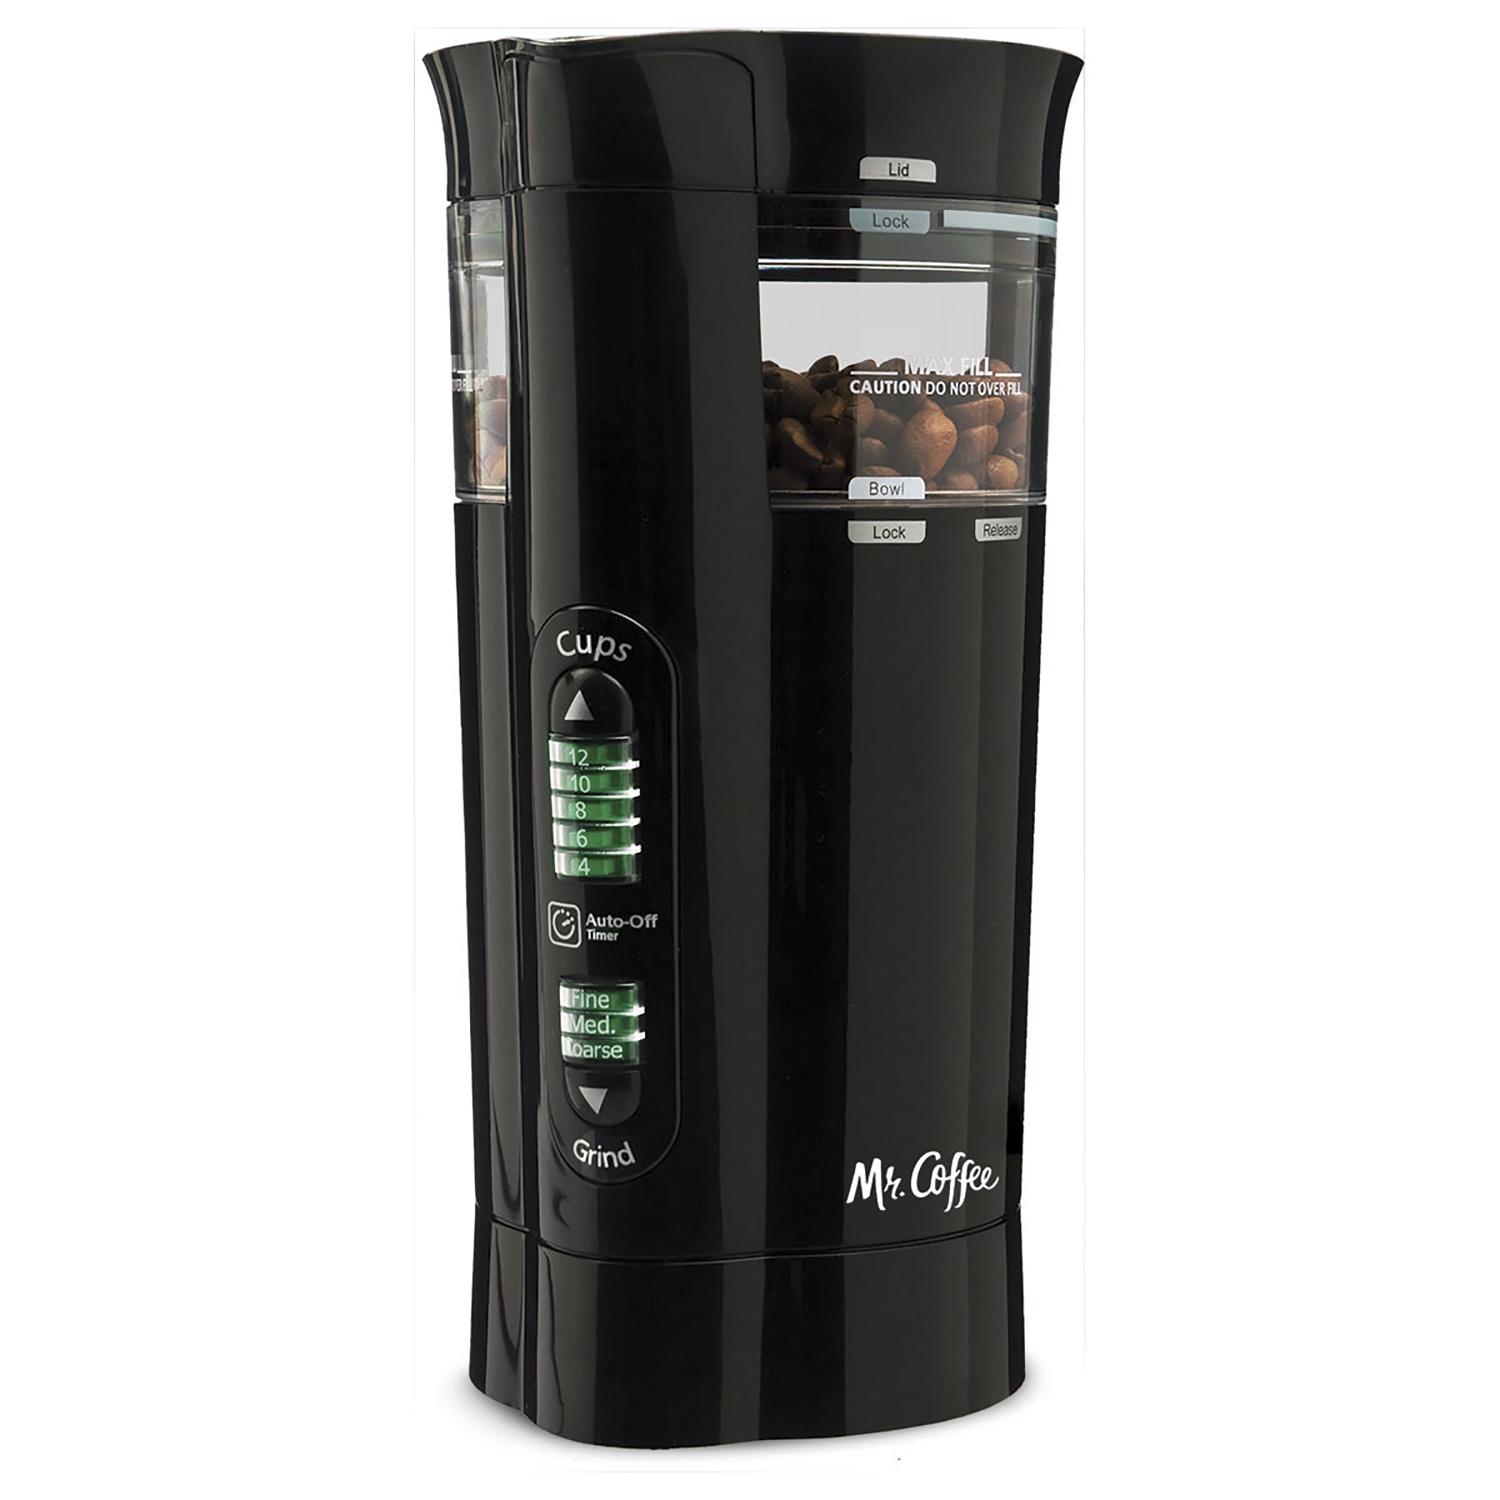 Mr. Coffee Simply Great Coffee Maker 5 Cup 2129512 – Good's Store Online